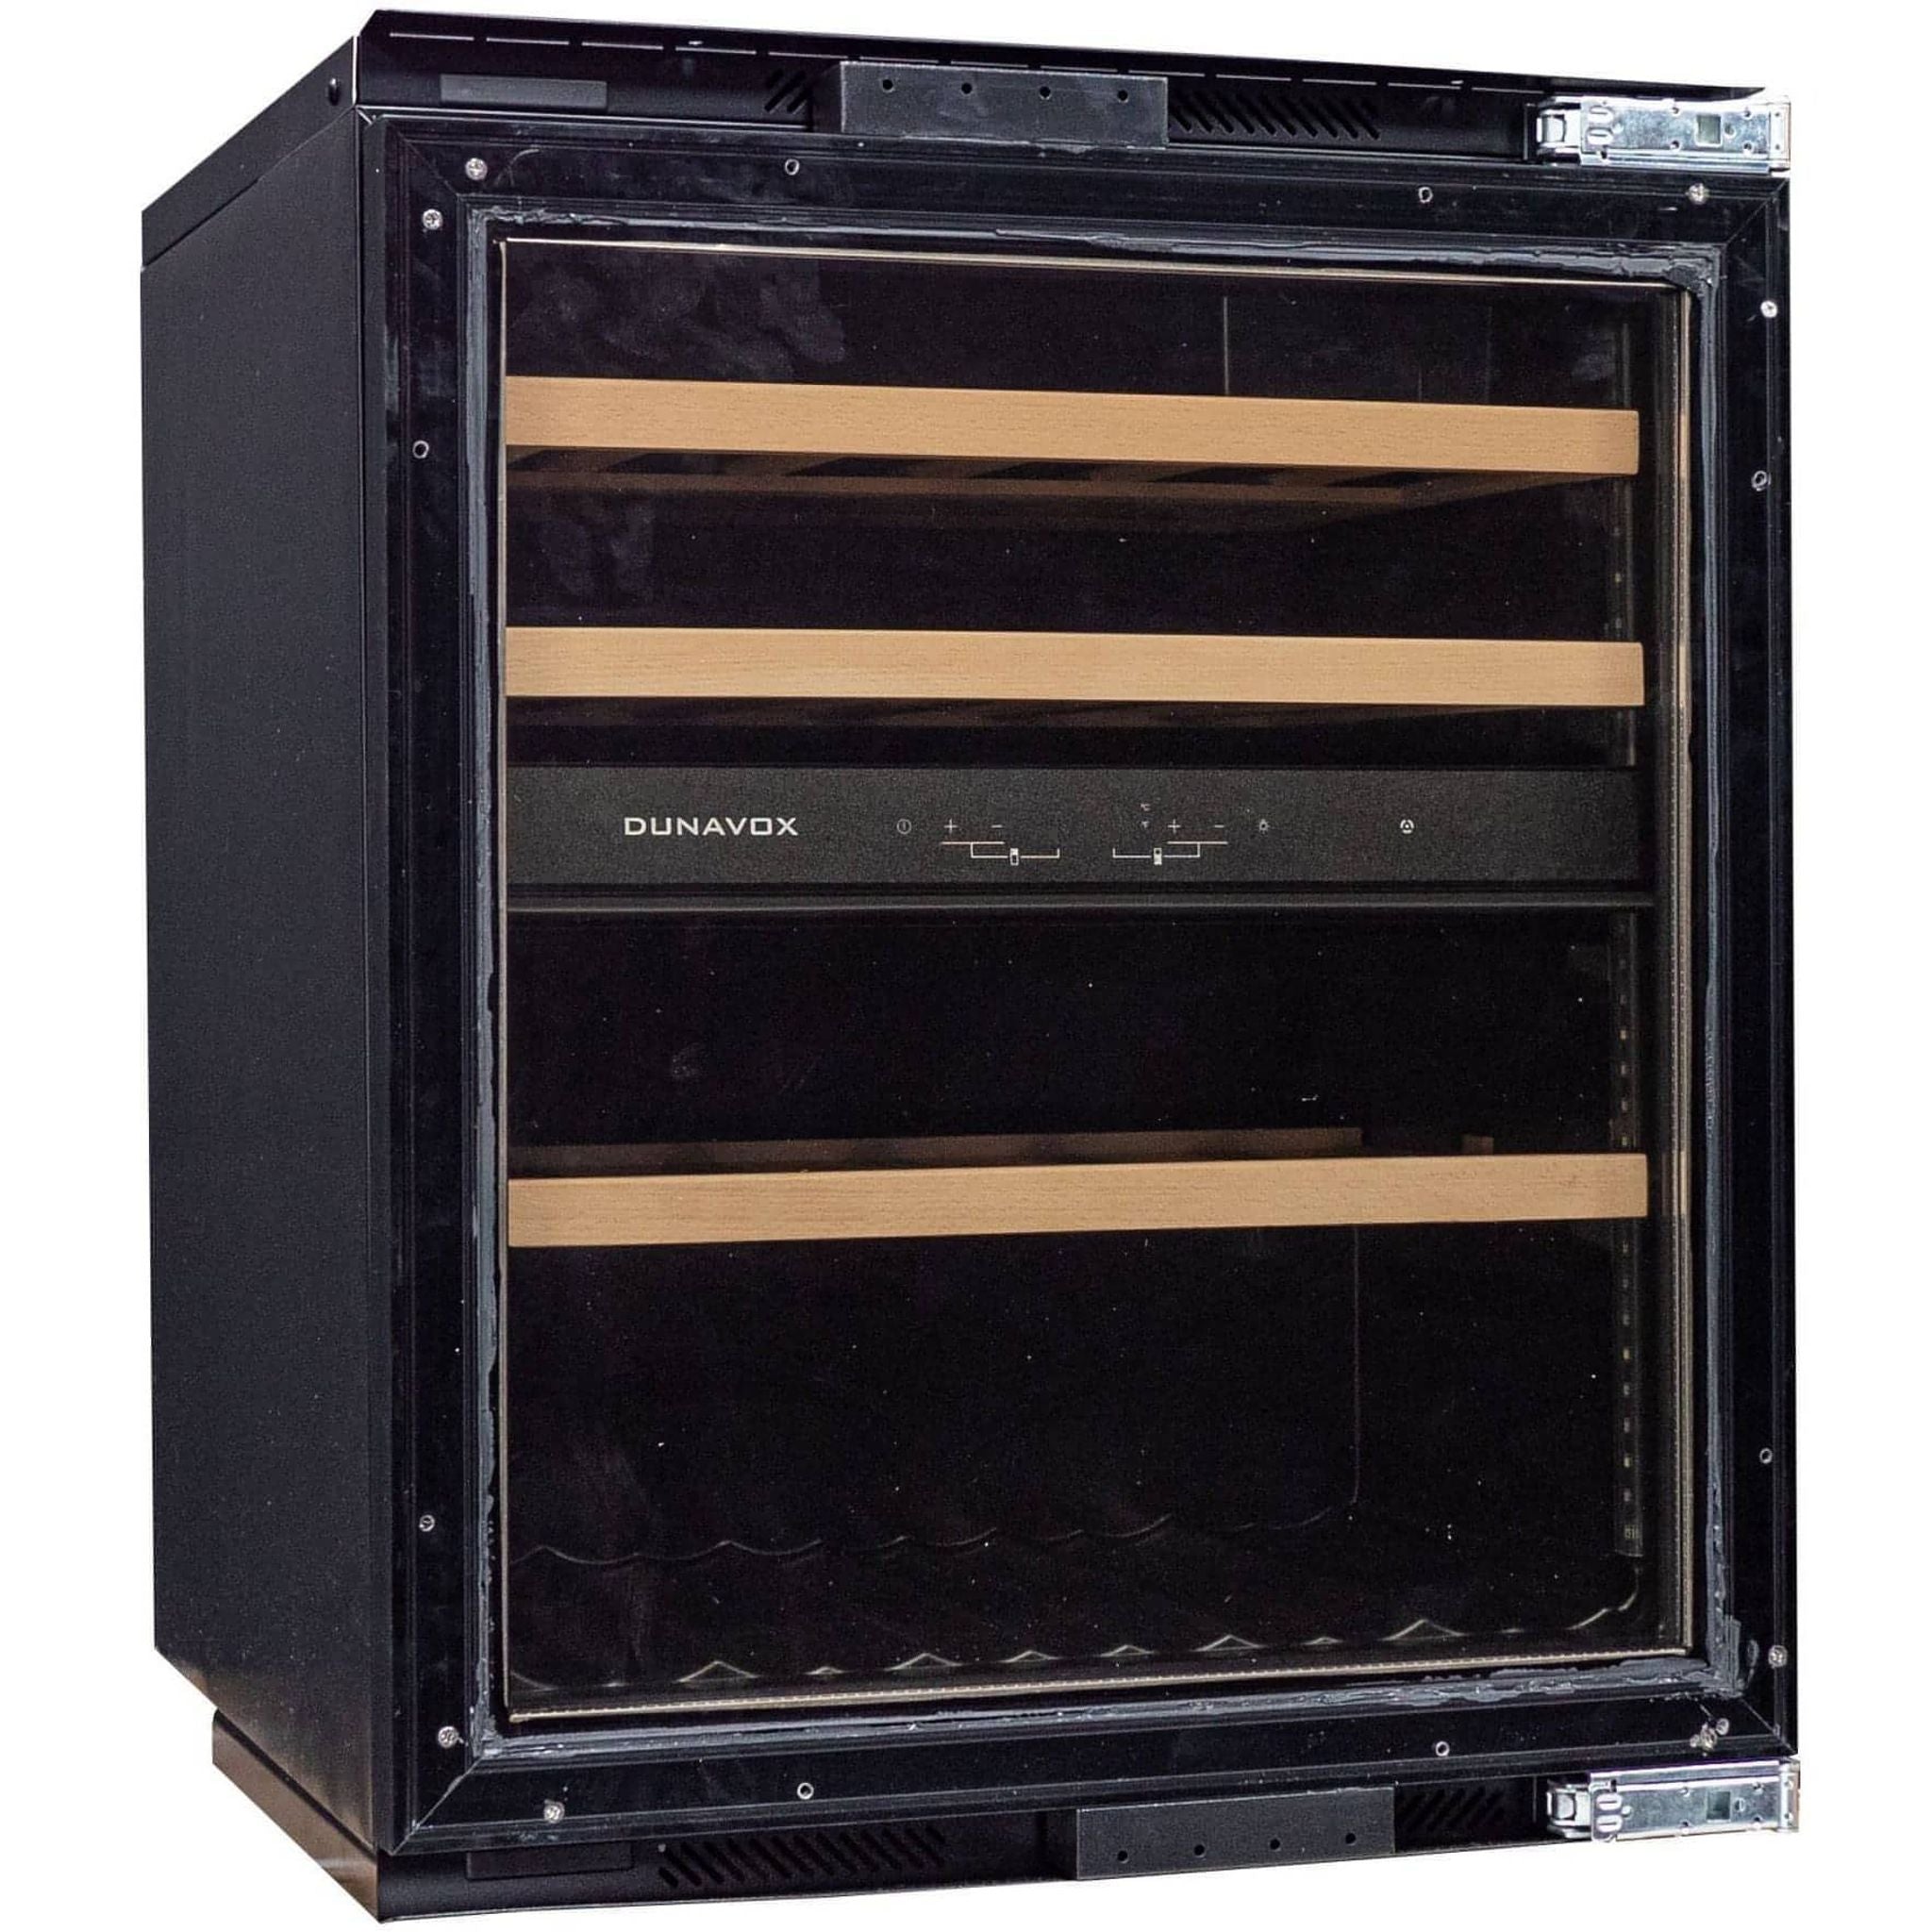 Dunavox GLANCE-32 - Dual Zone 32 Bottle -Fully Integrated Wine Cooler - DAVG-32.80DOP.TO